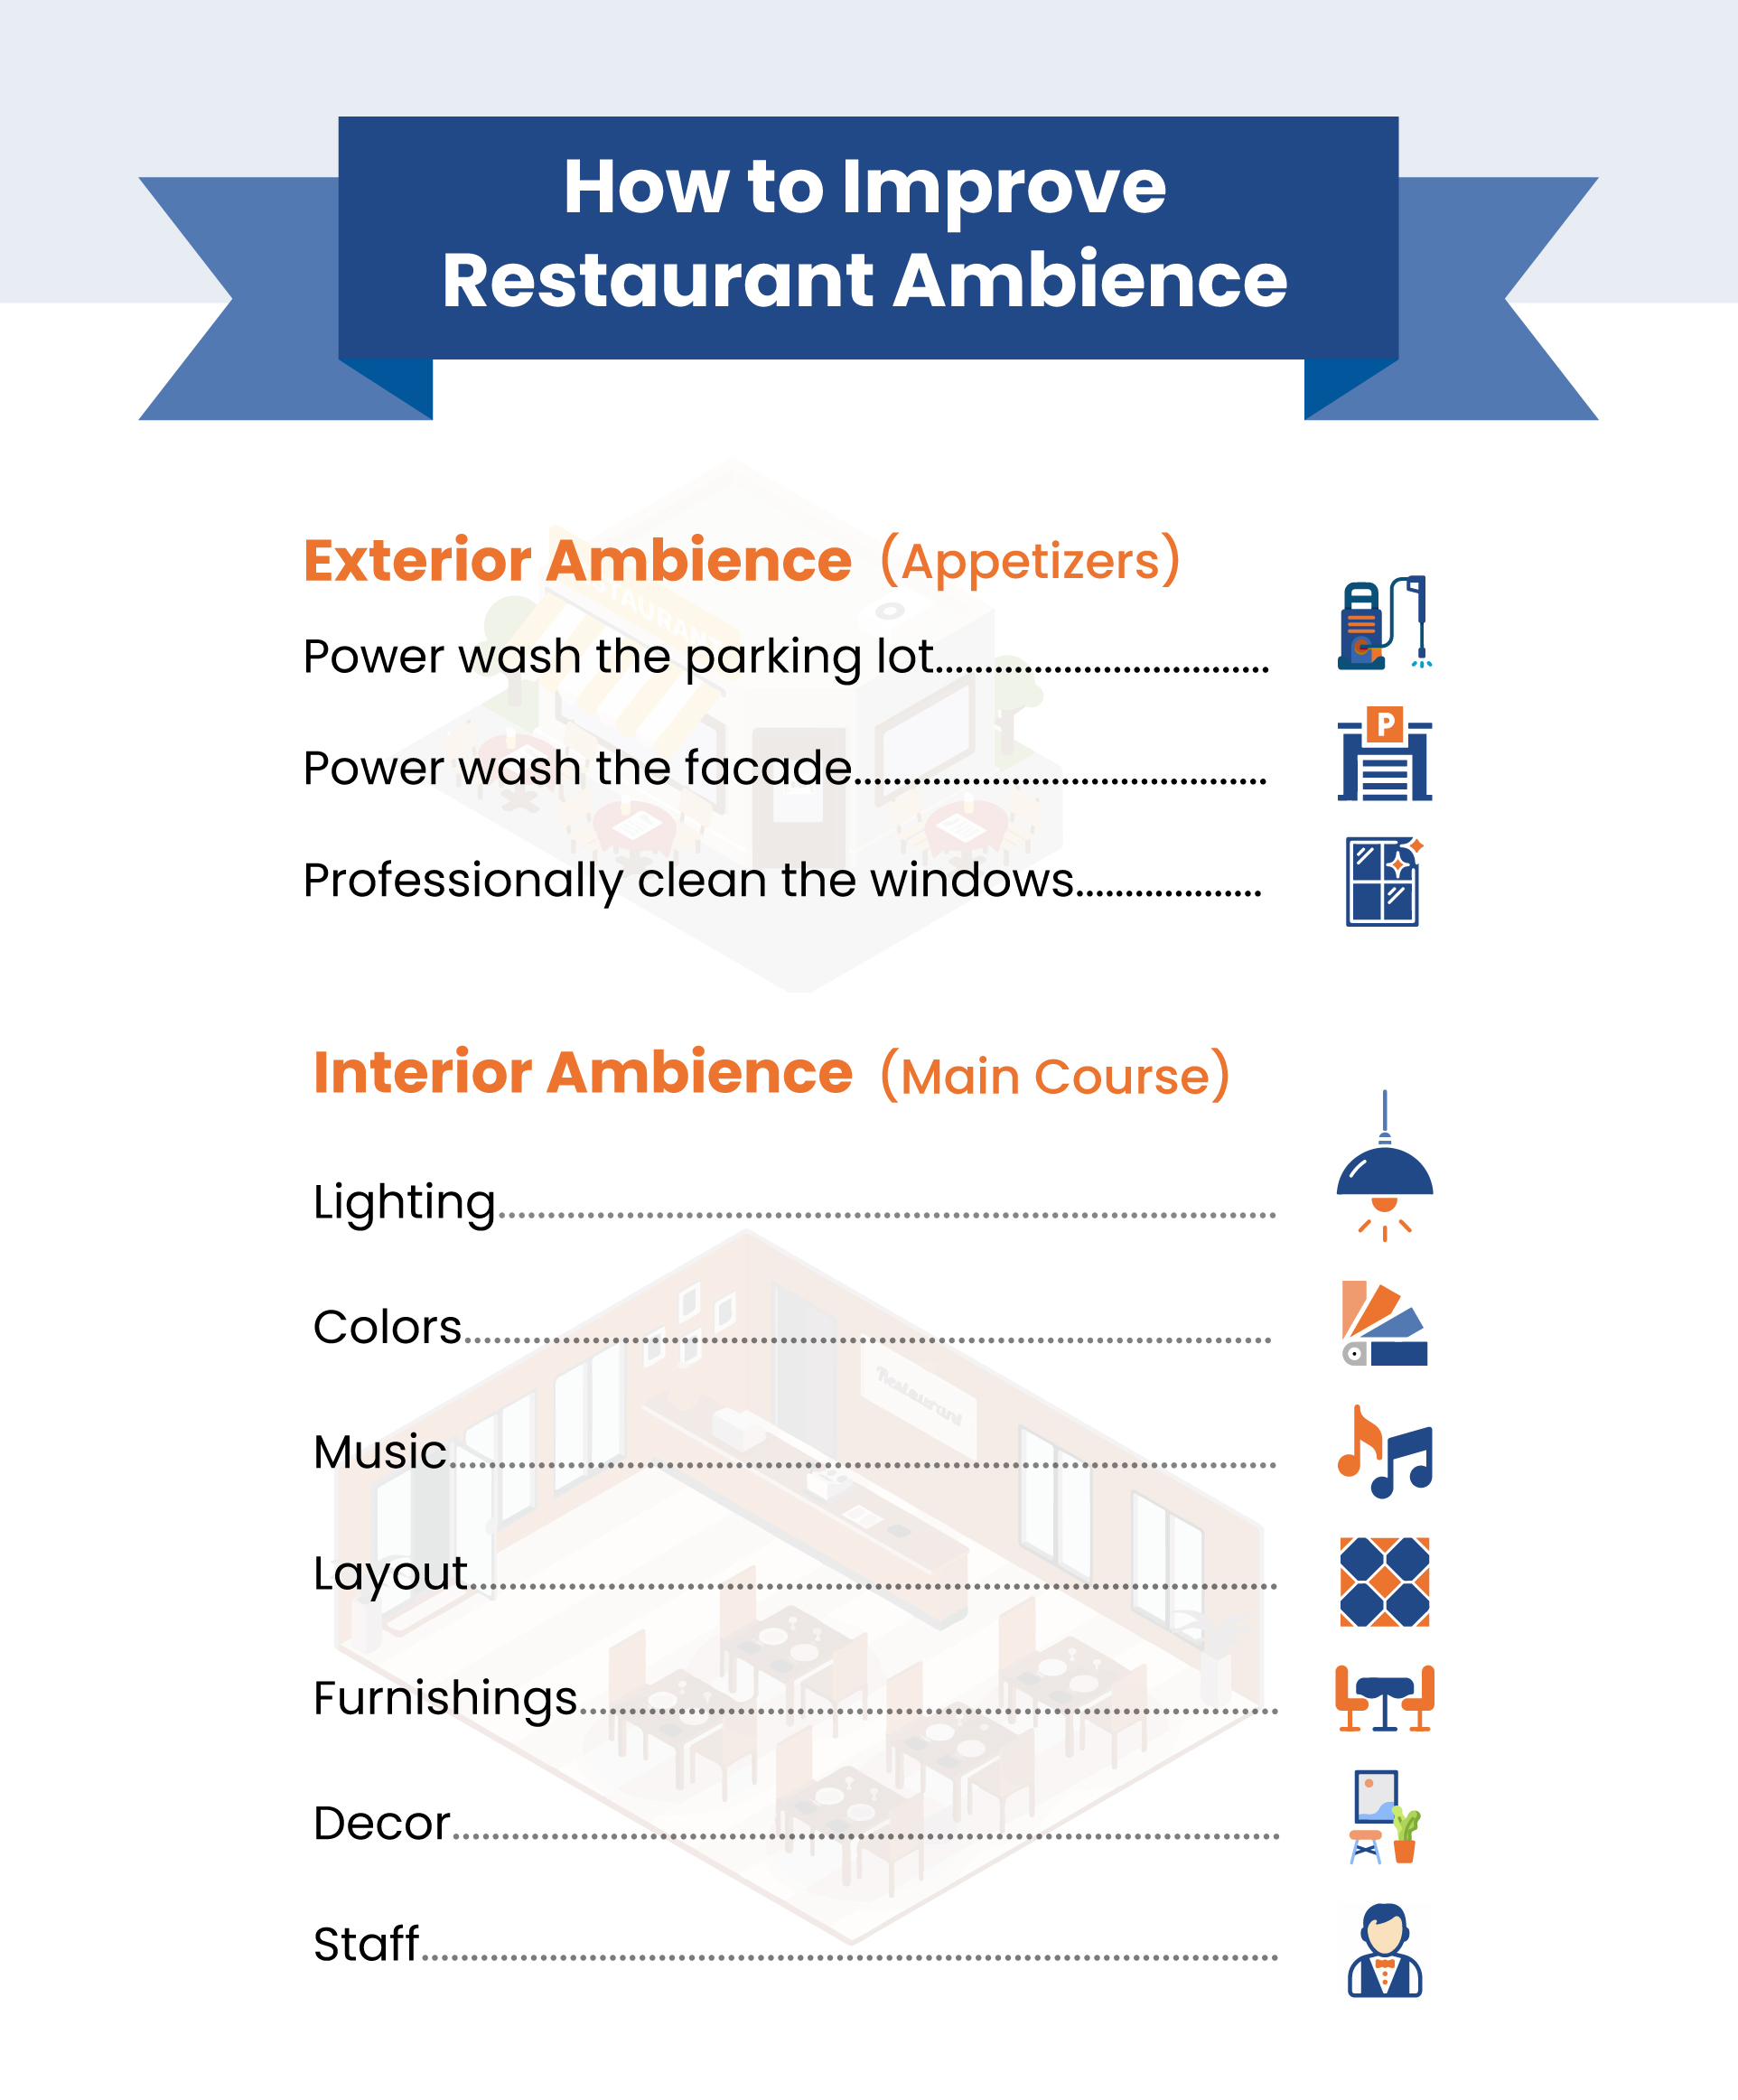 PDXProWash - How to Improve Restaurant Ambience